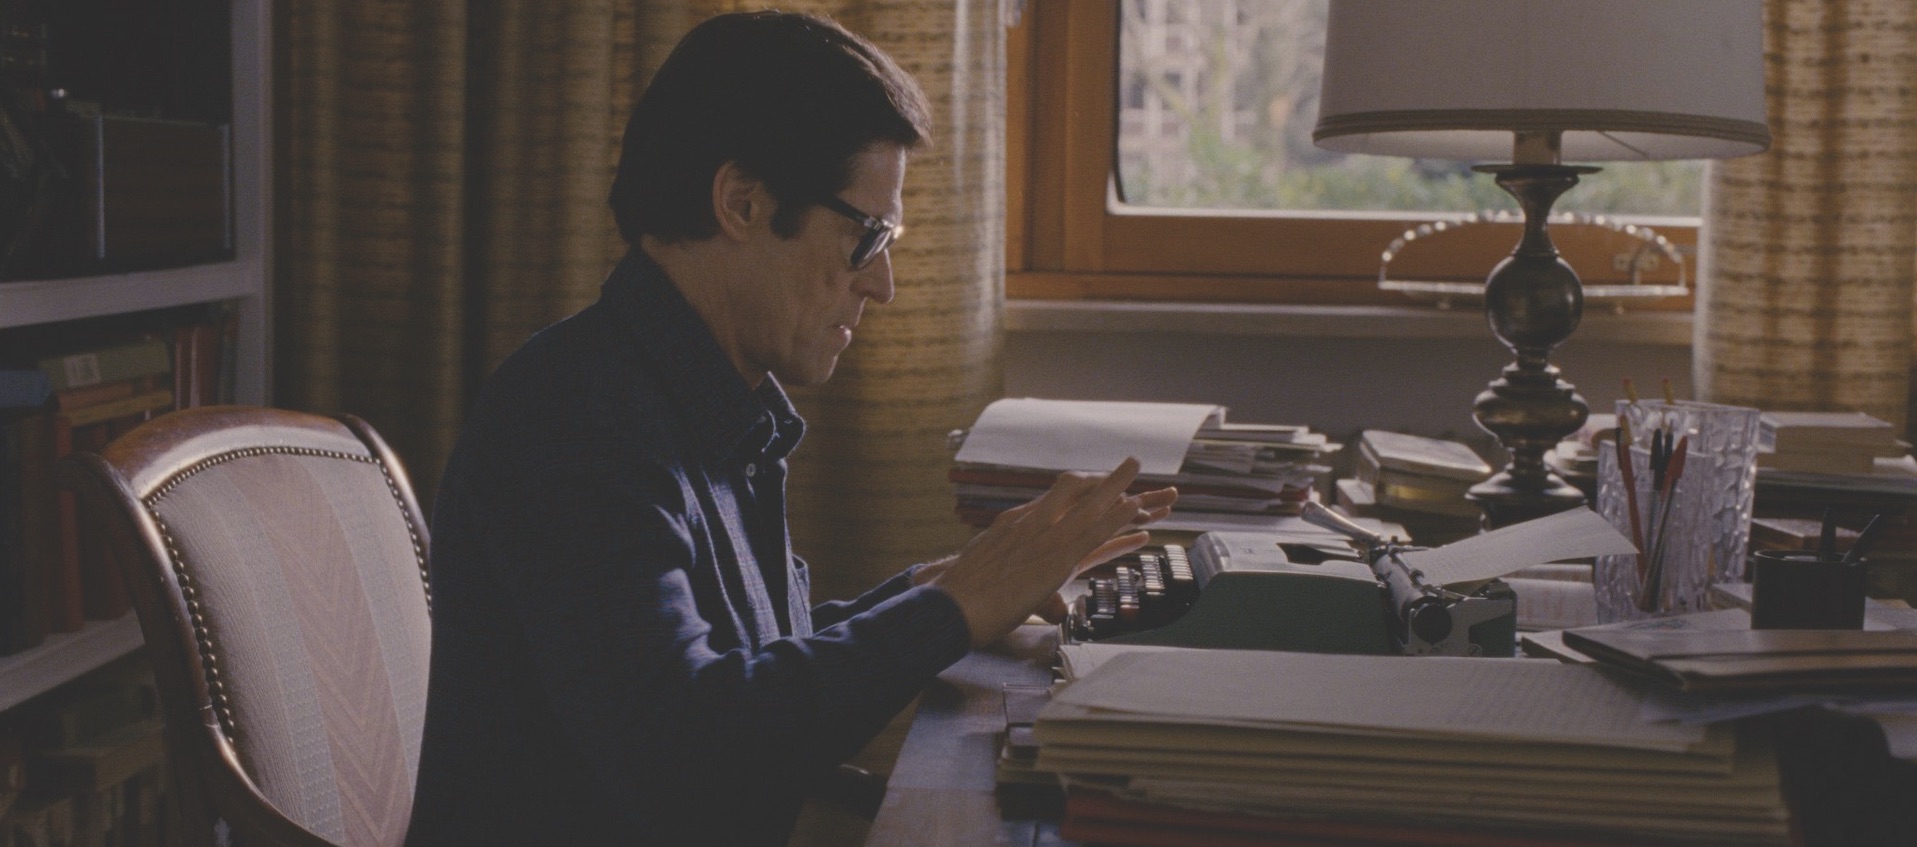 Willem Dafoe as filmmaker Pier Paolo Pasolini sits at a desk and types in a still from Abel Ferrar's biopic Pasolini, courtesy of Kino Lorber Films 